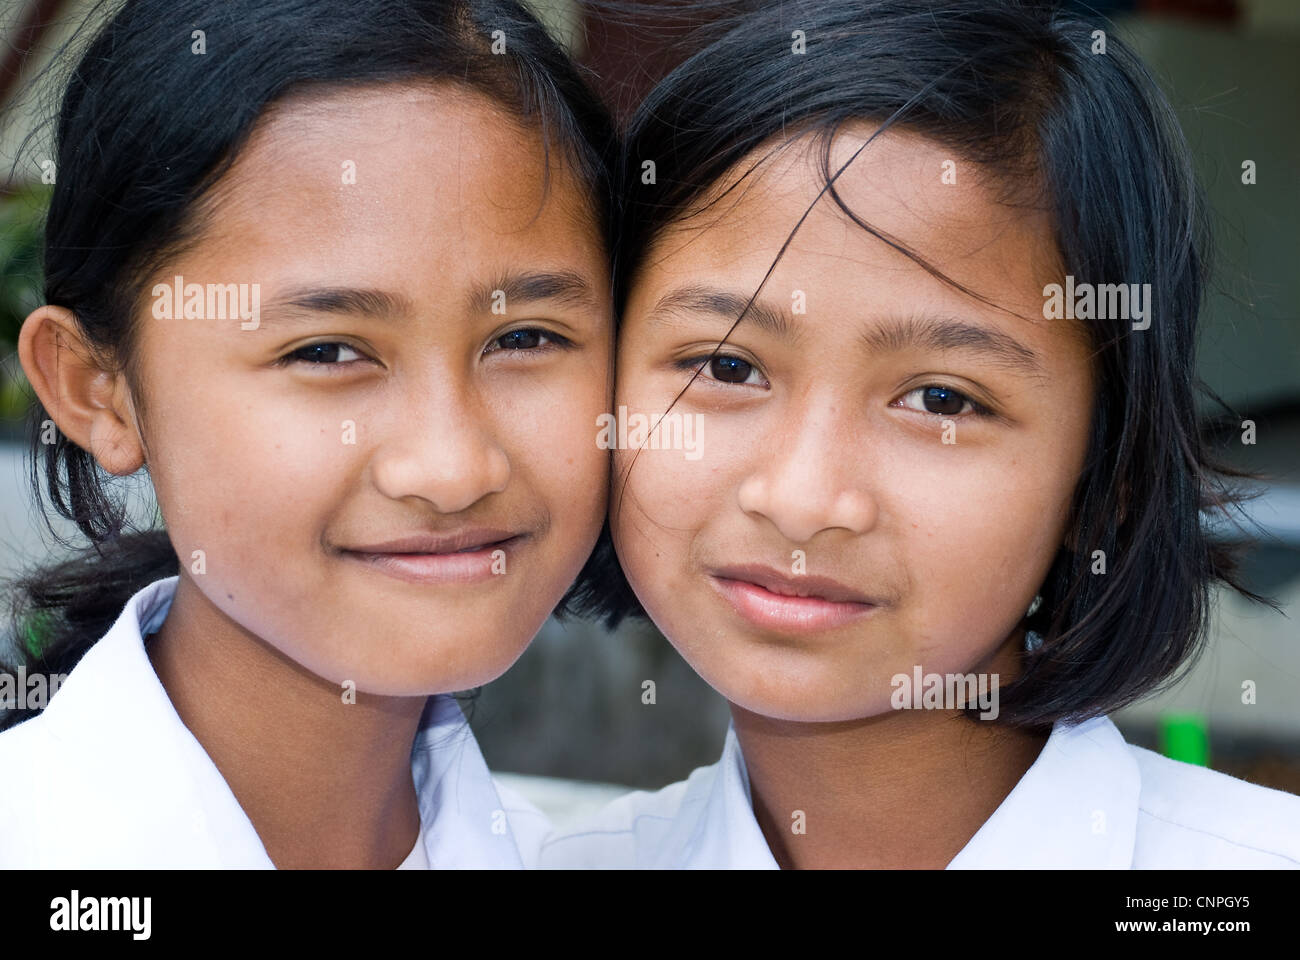 girls in kupang, west timor, indonesia Stock Photo